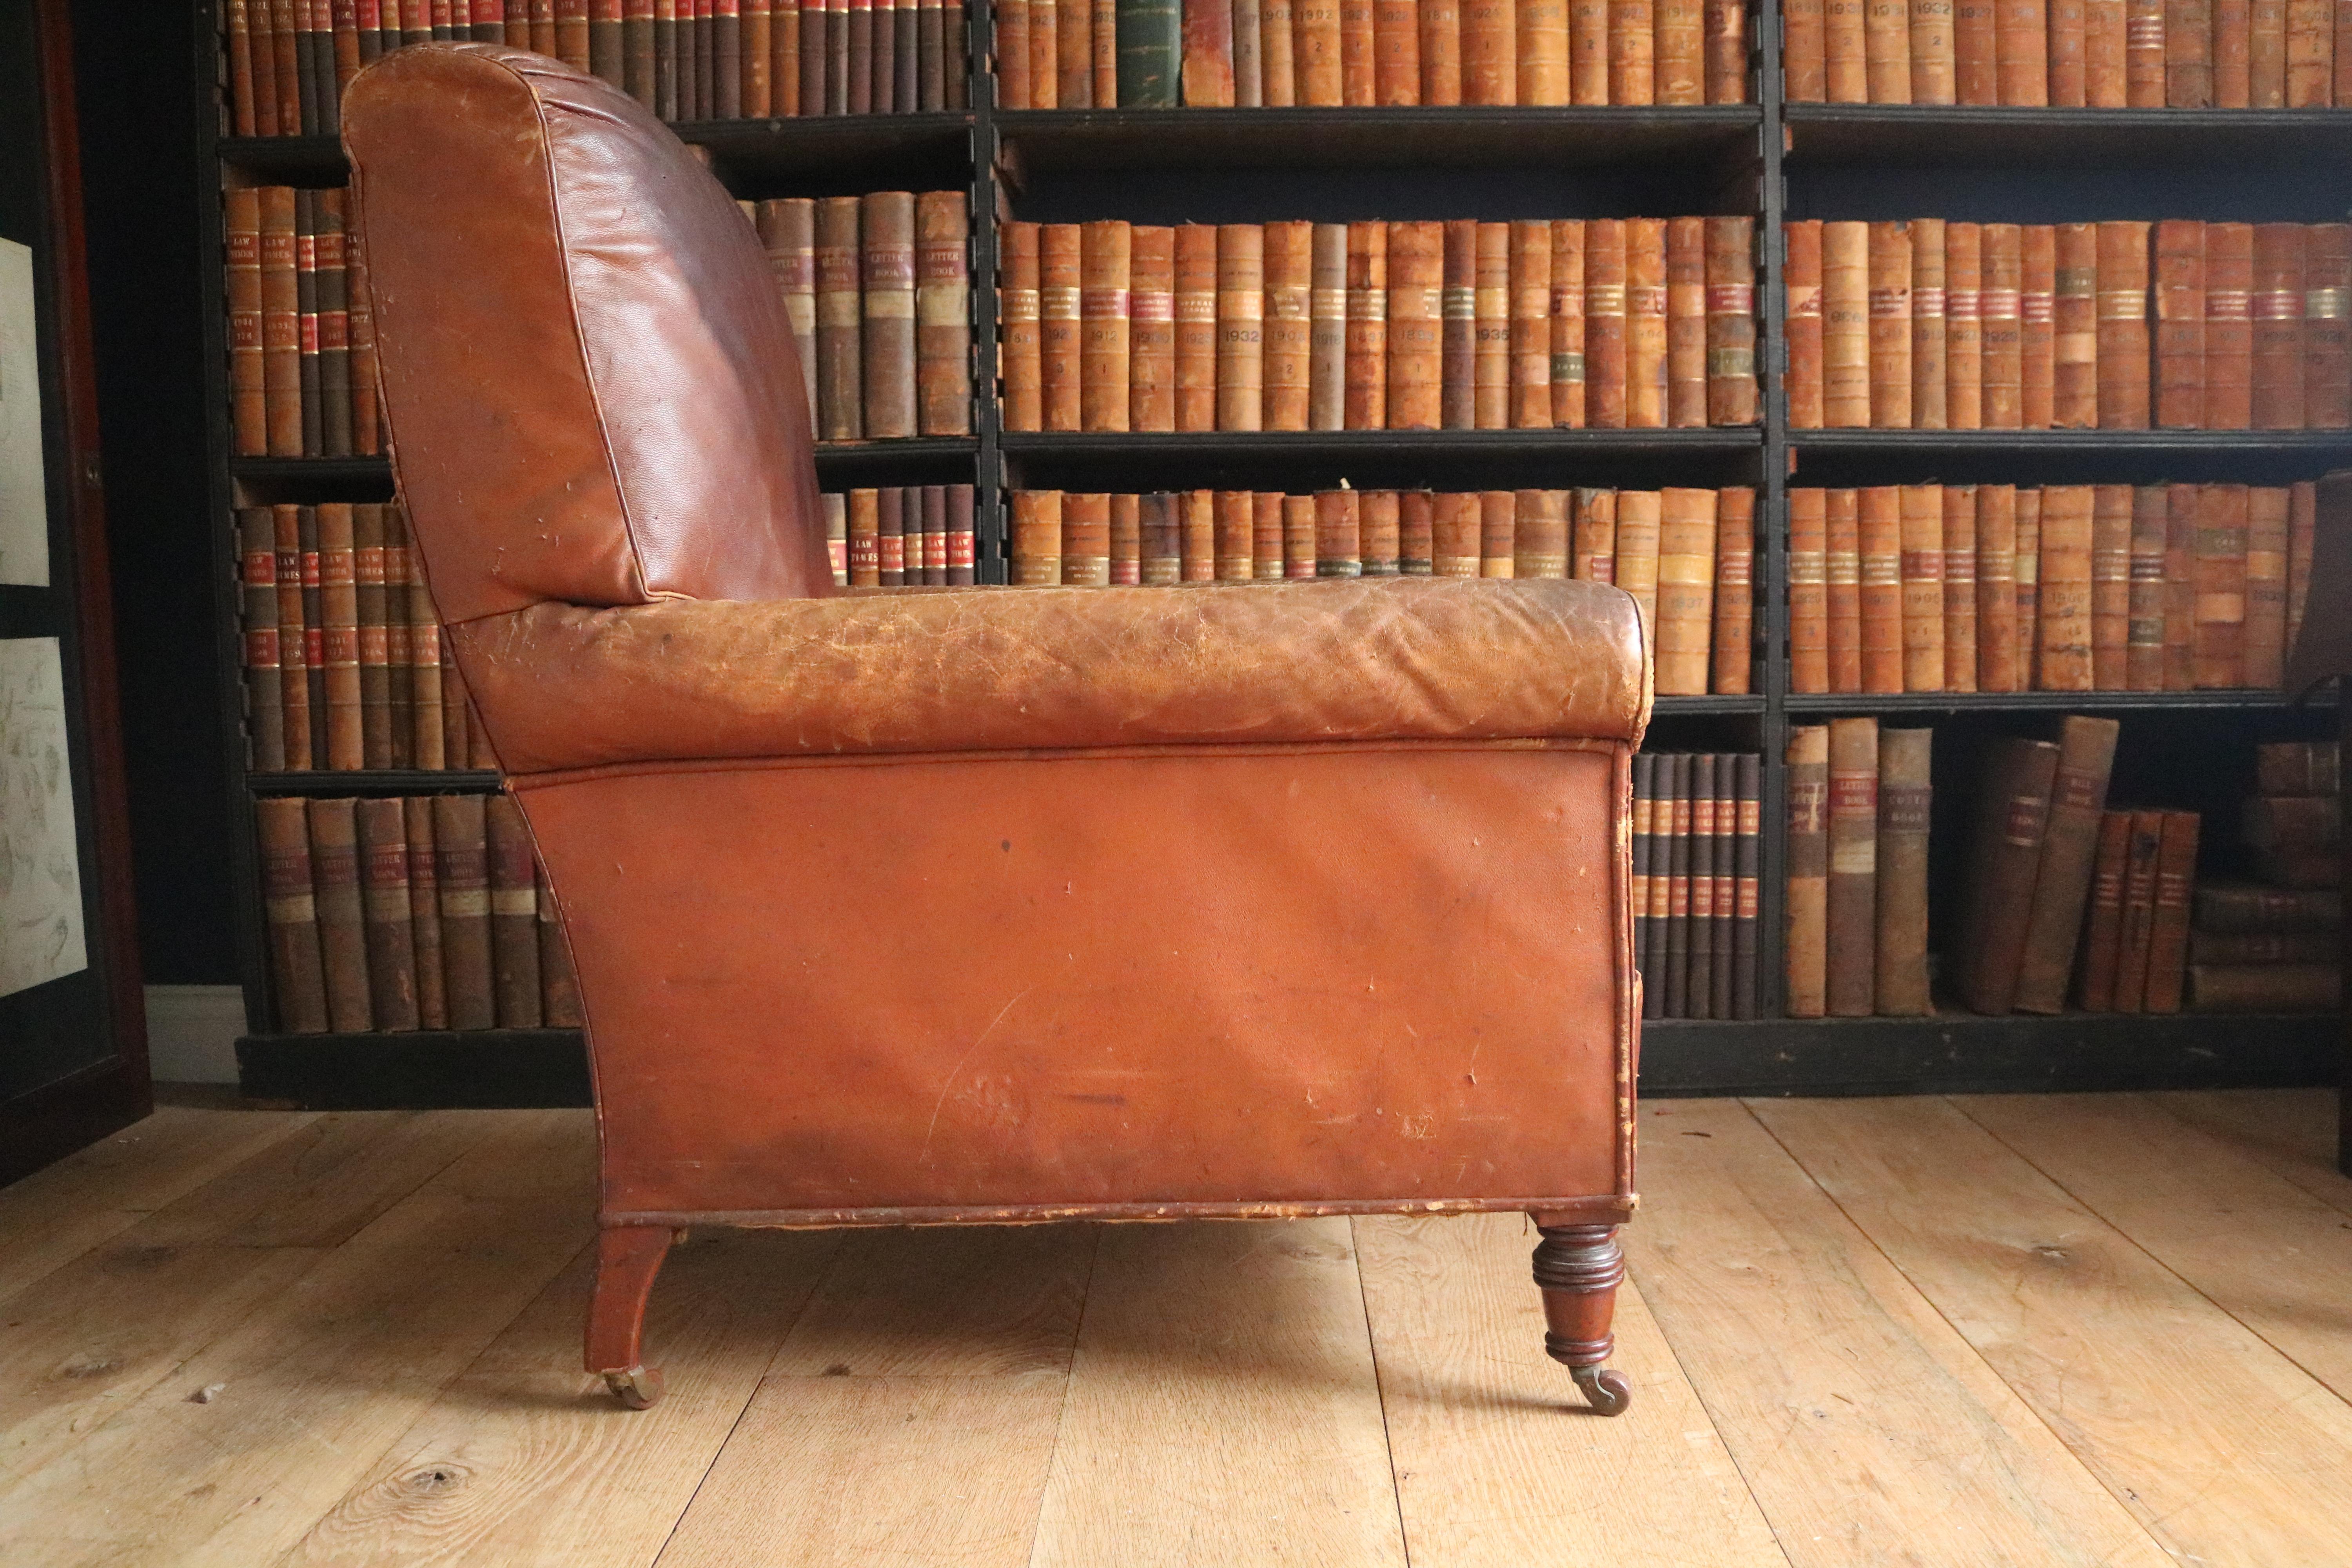 A fantastic 19th century leather armchair in a lovely London tan color, with a sack back and a down loose cushion. The chair is in remarkably good condition for its age and incredibly comfortable.
         